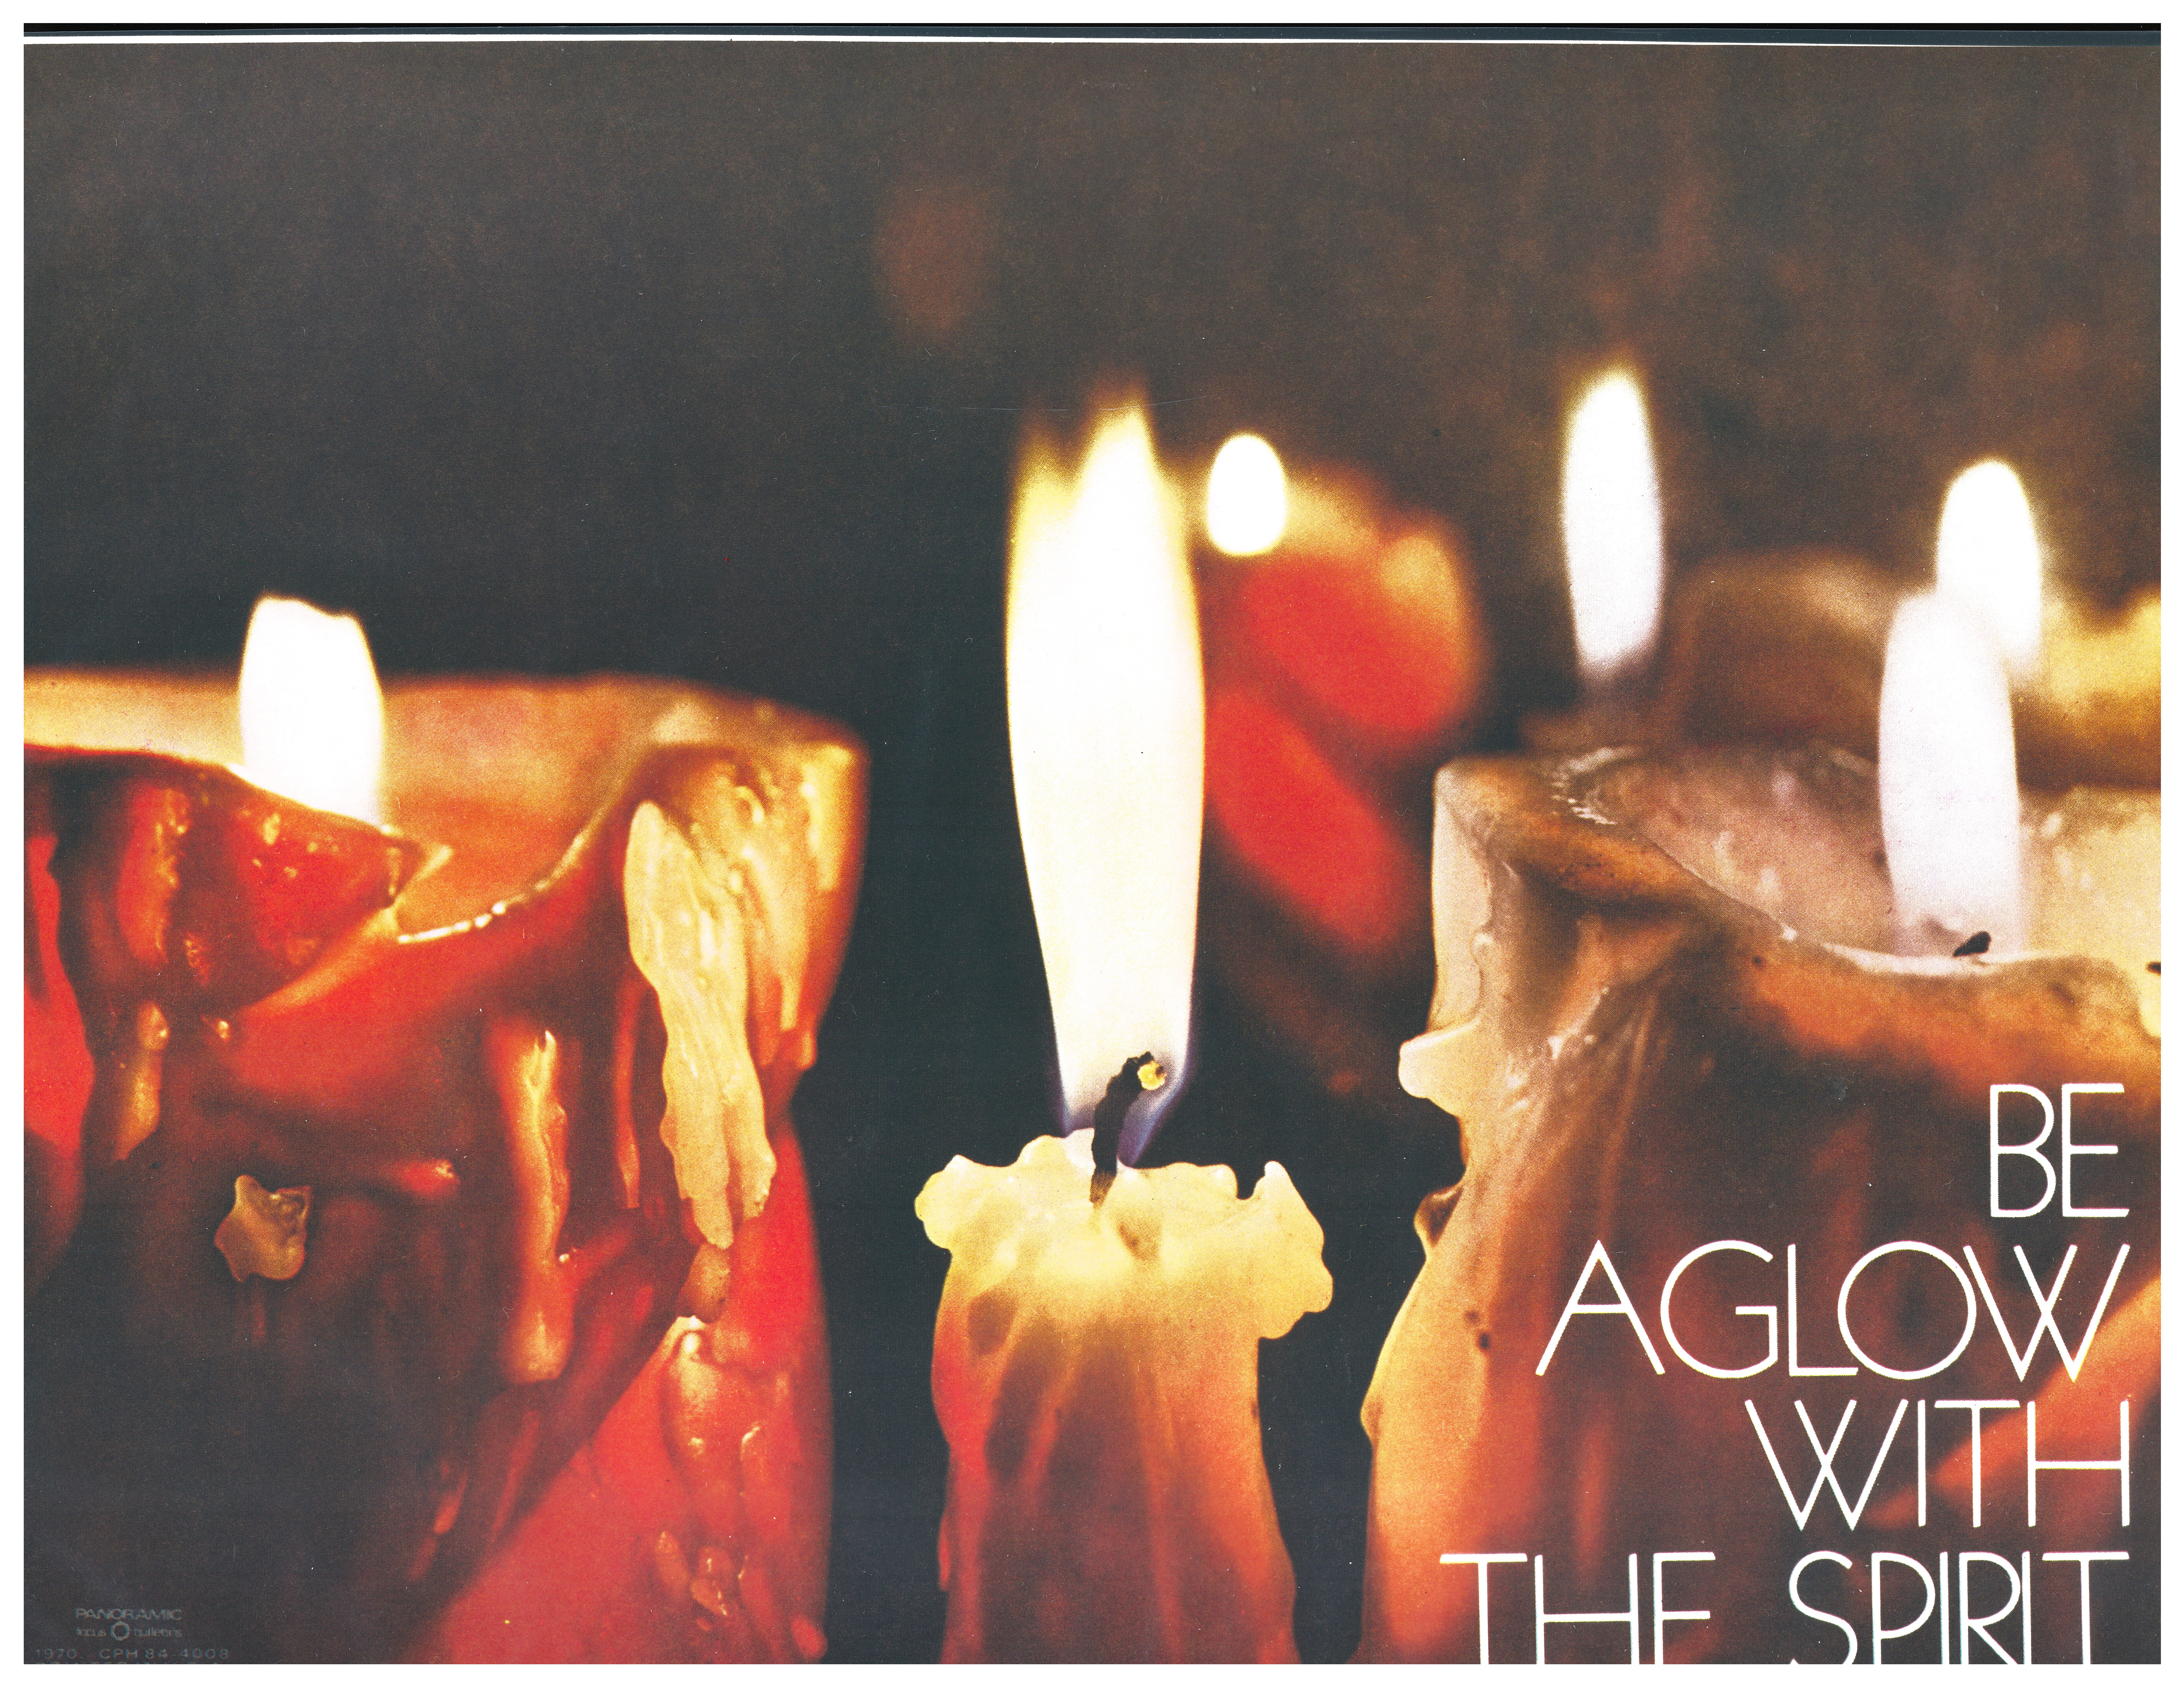 Bulletin Covers Confirmation Be Aglow With The Spirit-1970